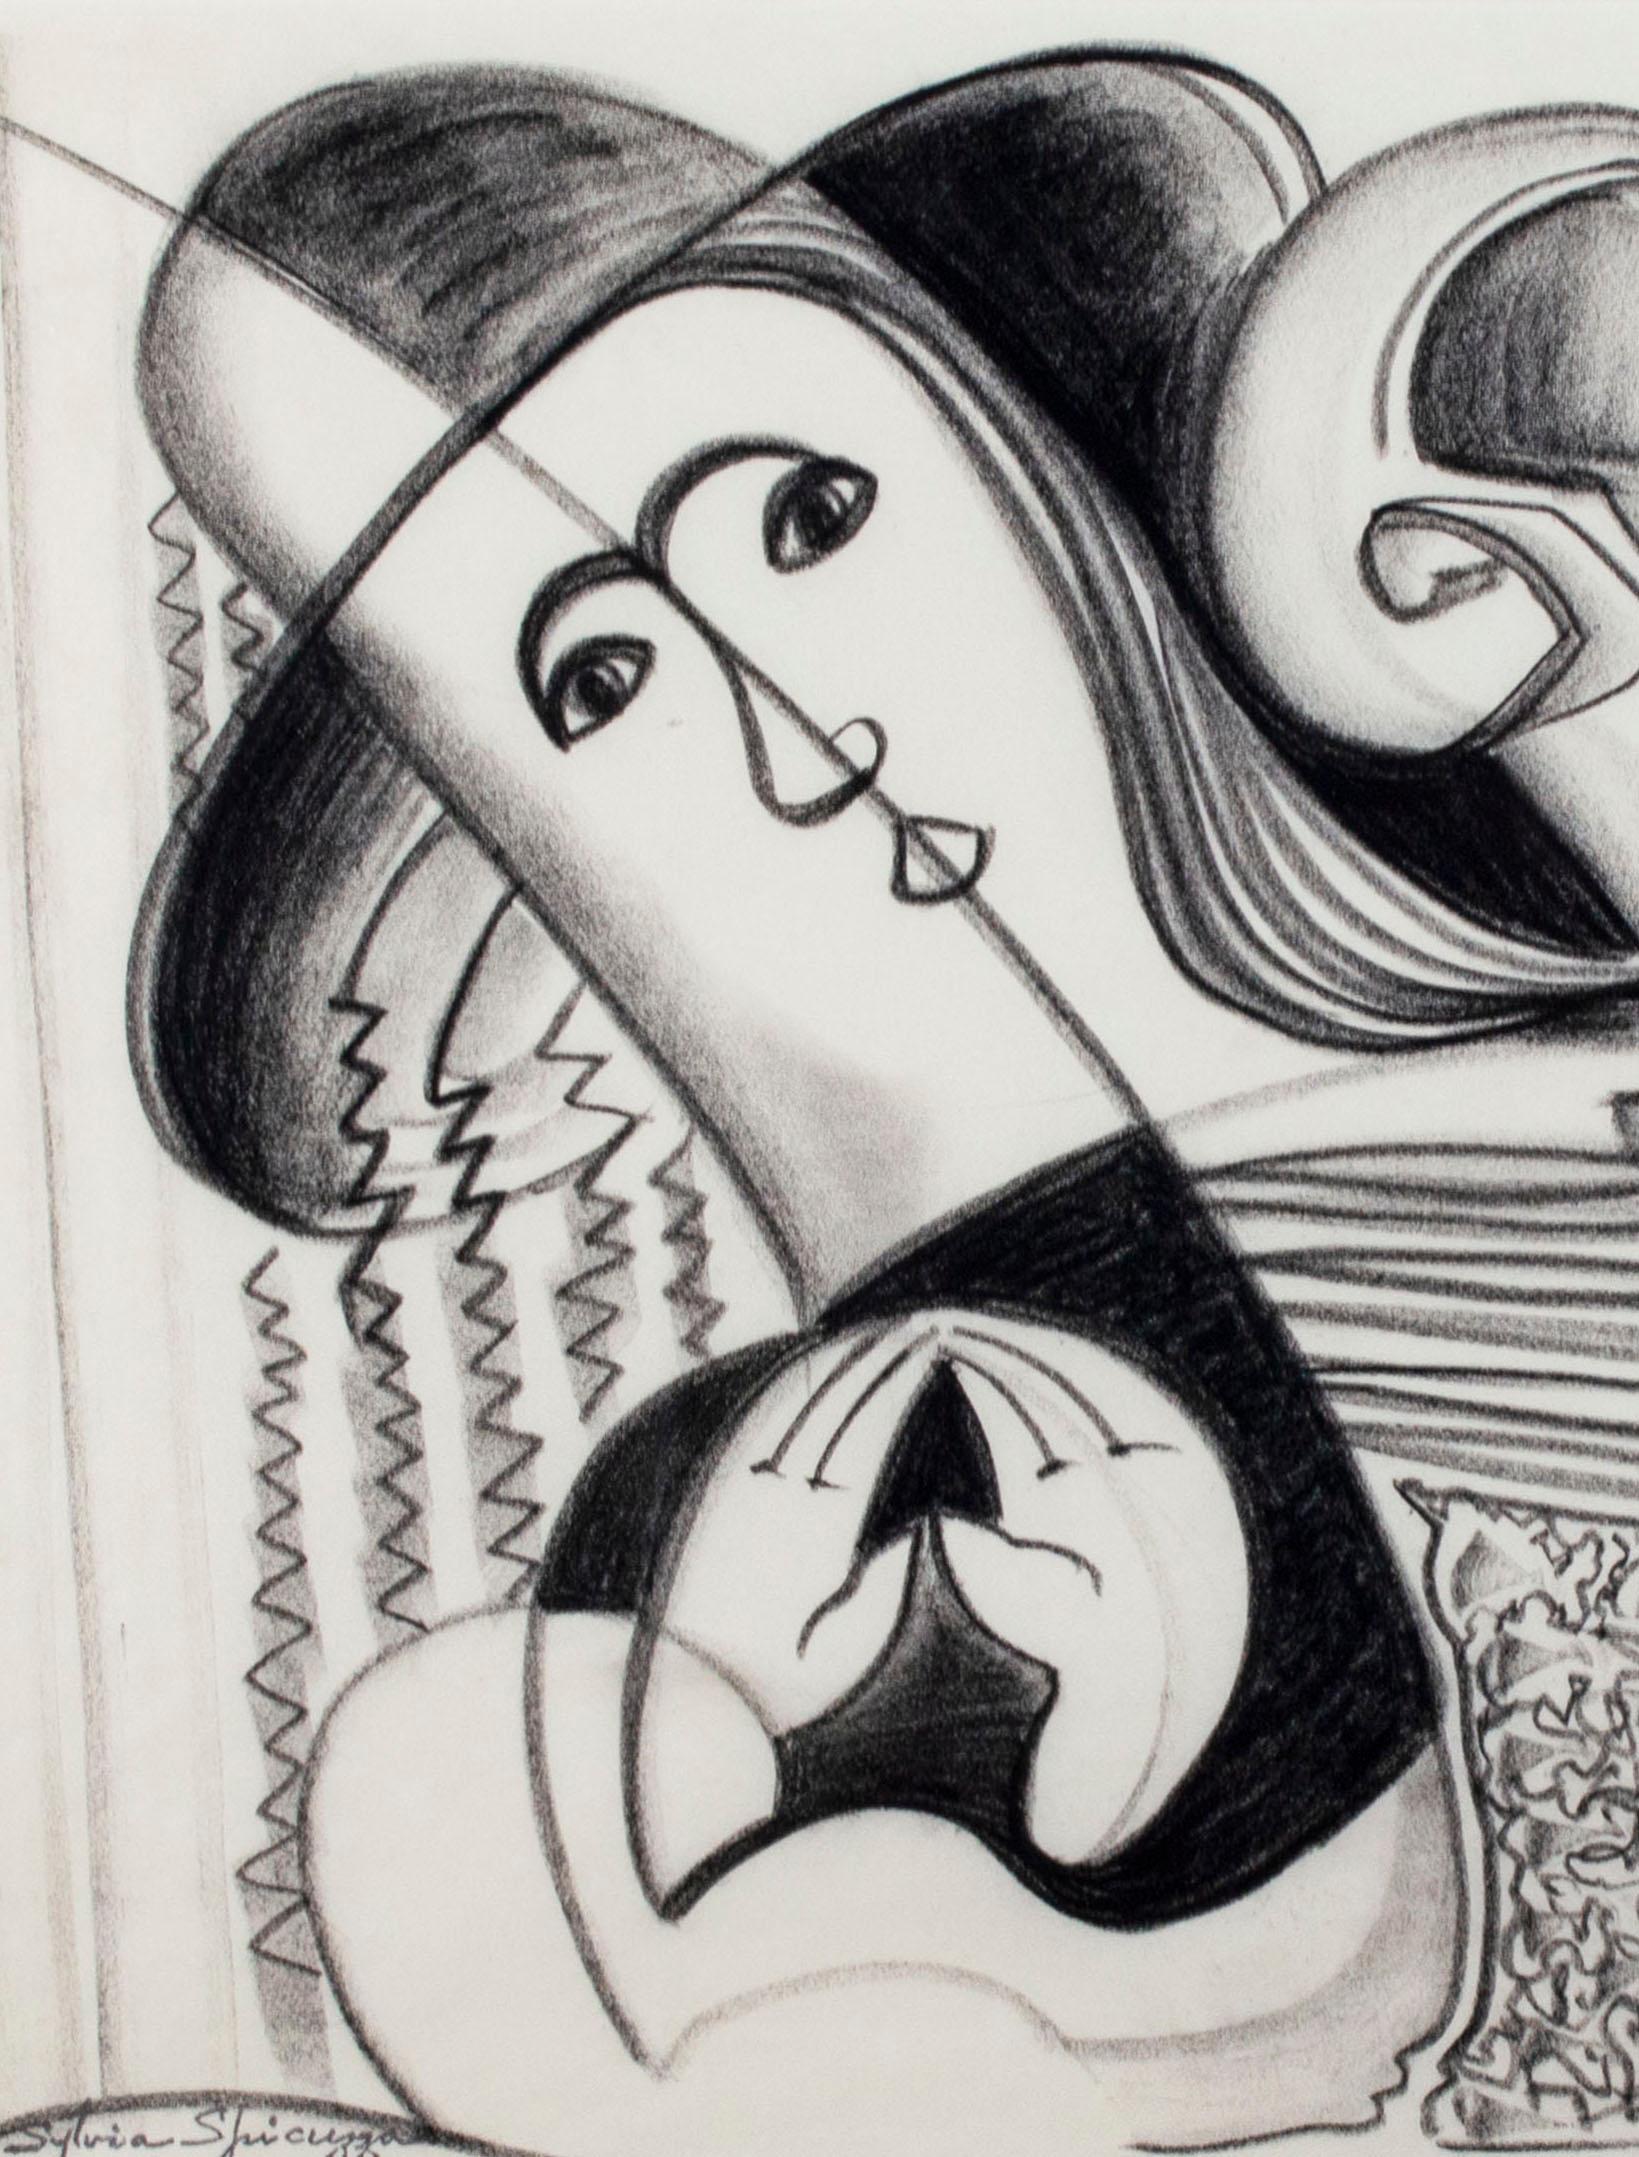 The present work, drawn with black Conté crayon on a calendar sheet, Sylvia Spicuzza presents the viewer with a rhythmic vision. The scene is dominated by the figure of a woman in a large hat on the left, the linear construction of her face indebted